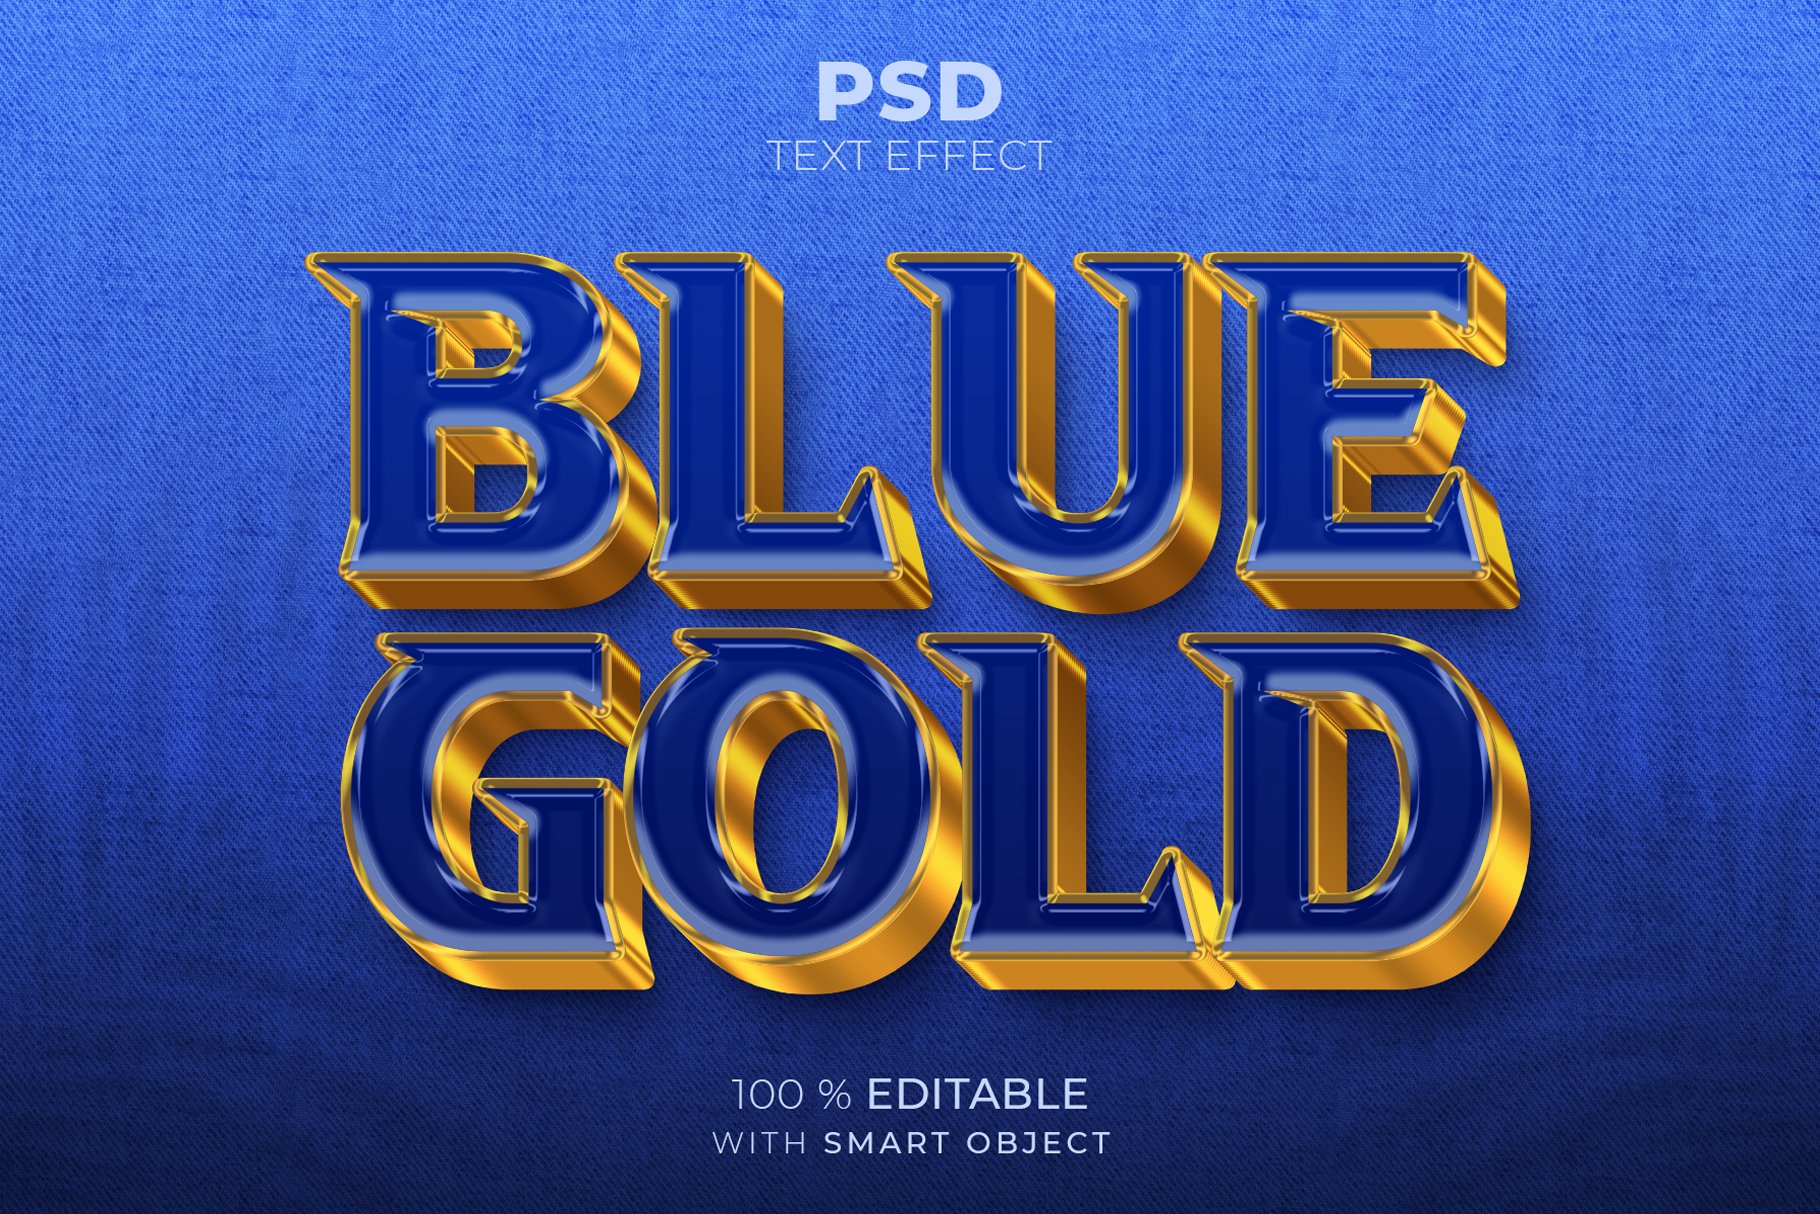 Blue Gold 3D editable text effectcover image.